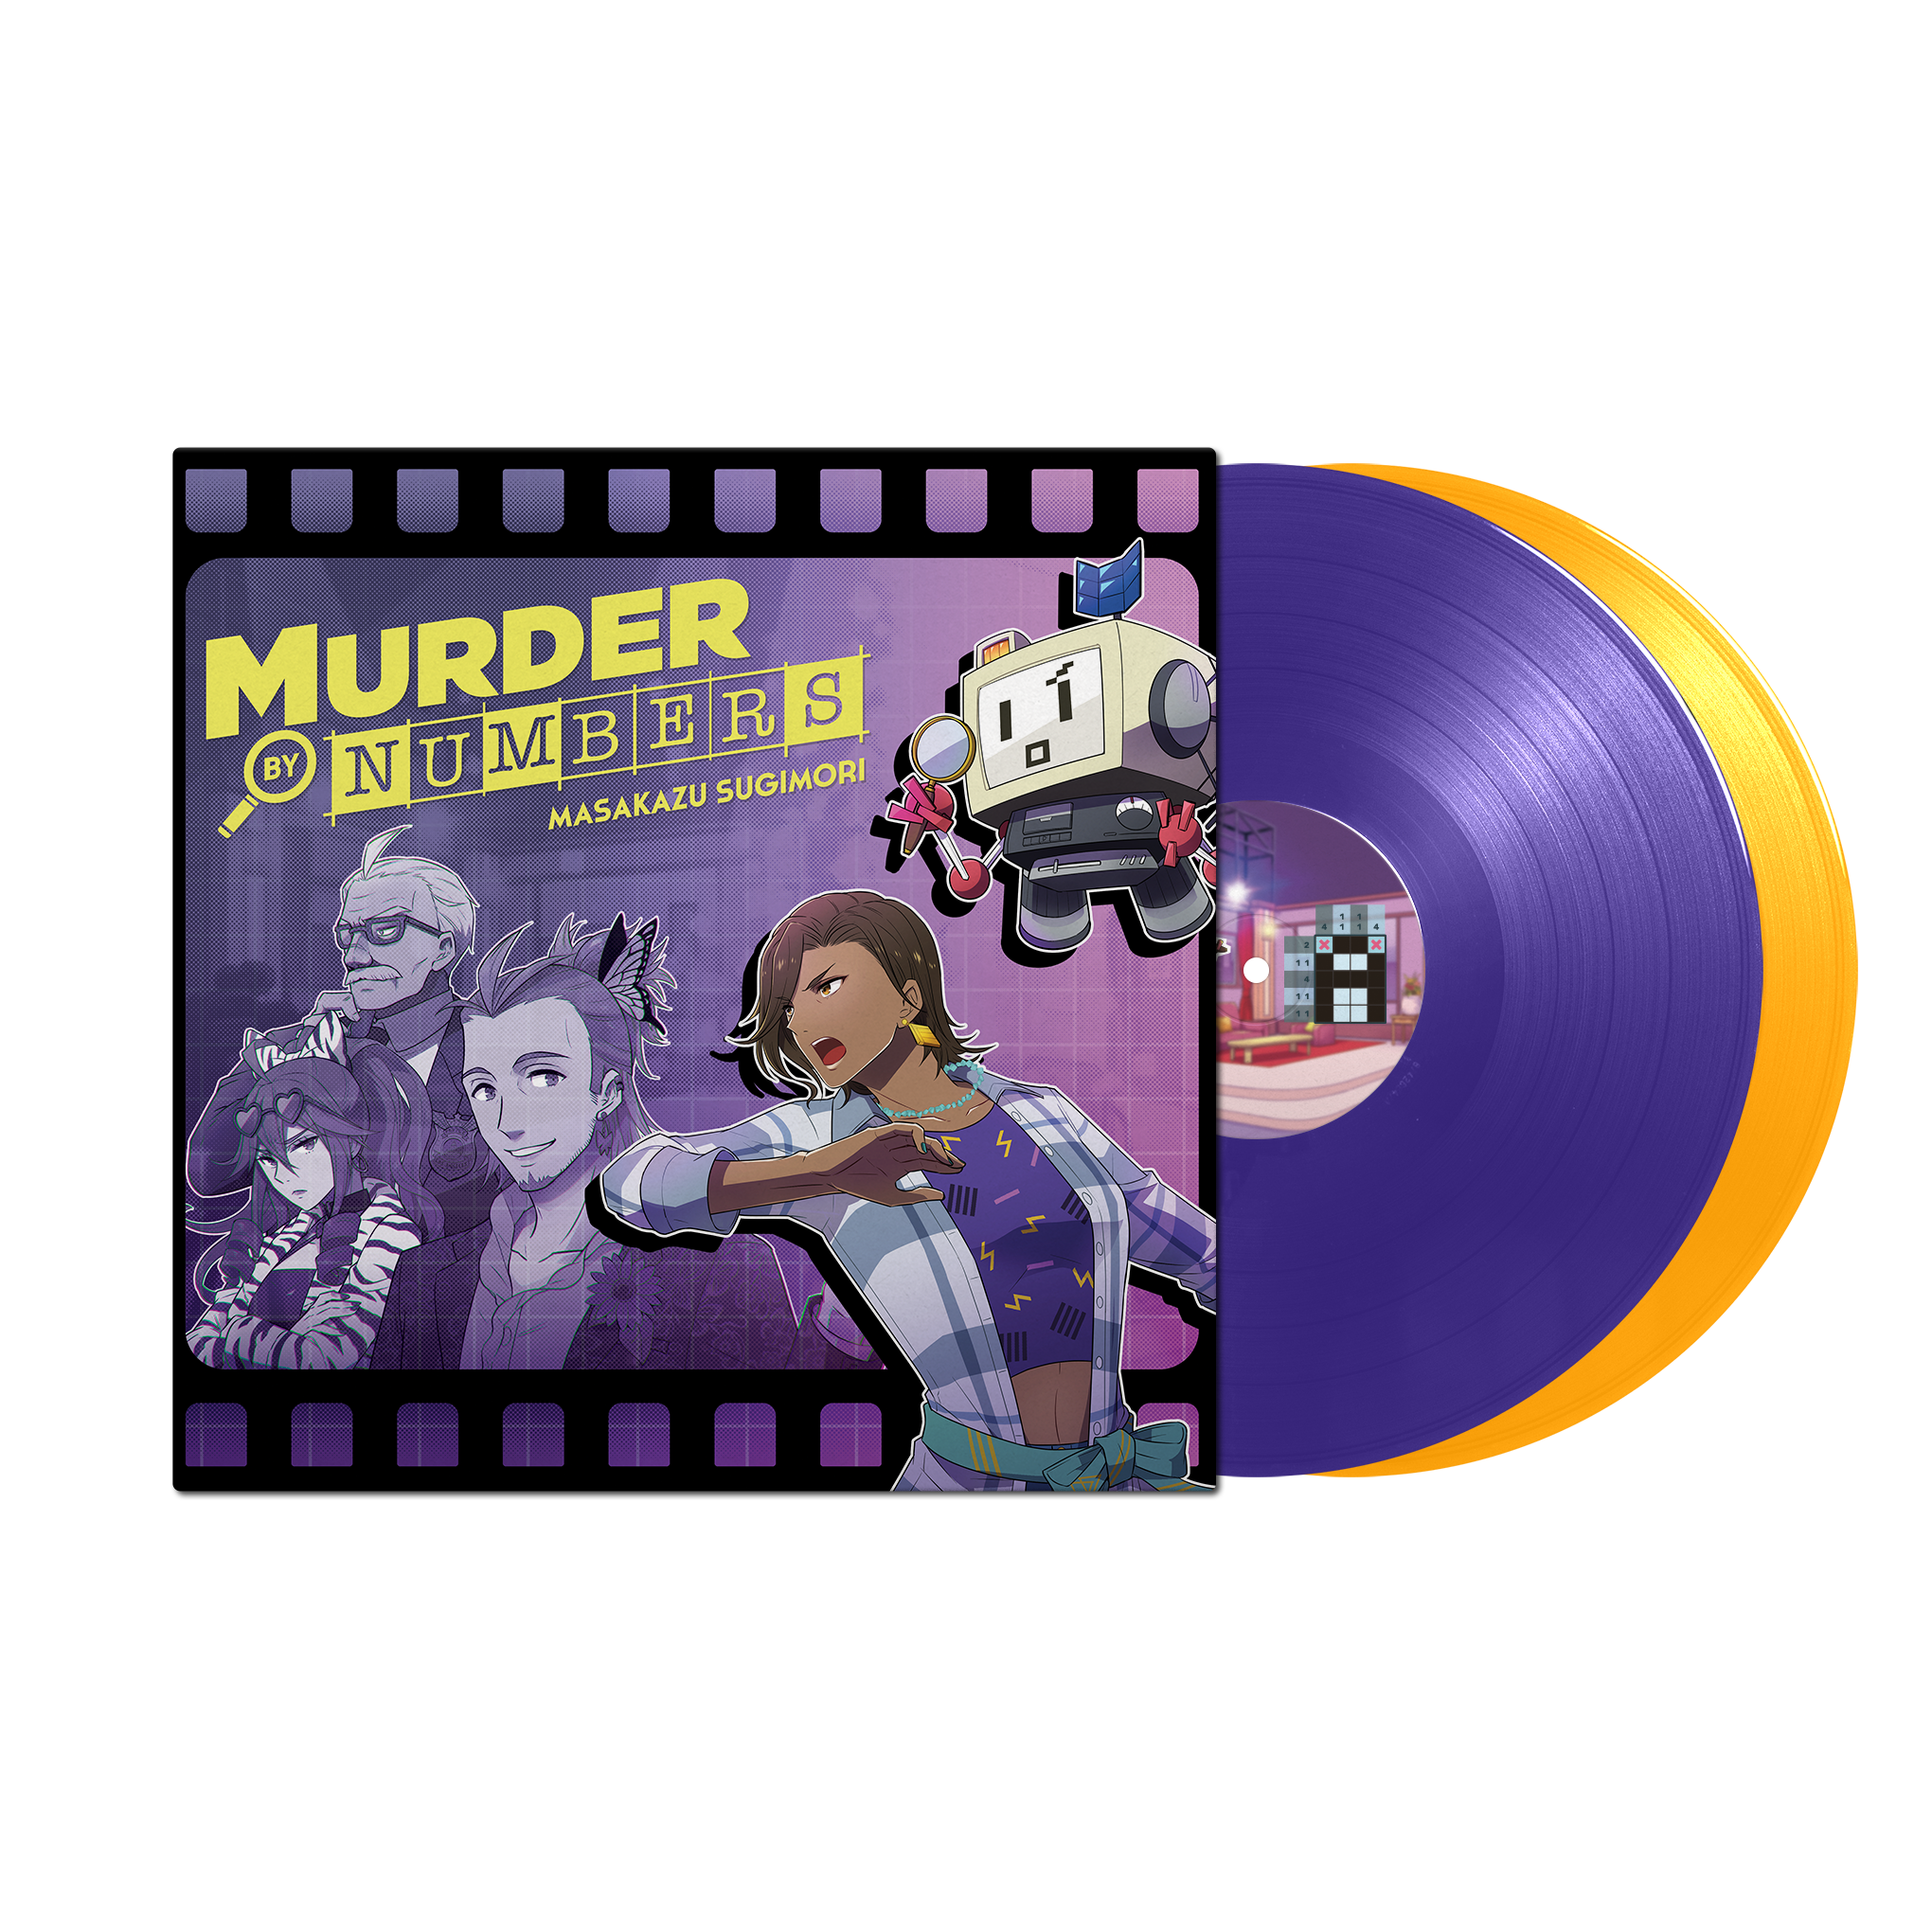 Murder By Numbers sticker front